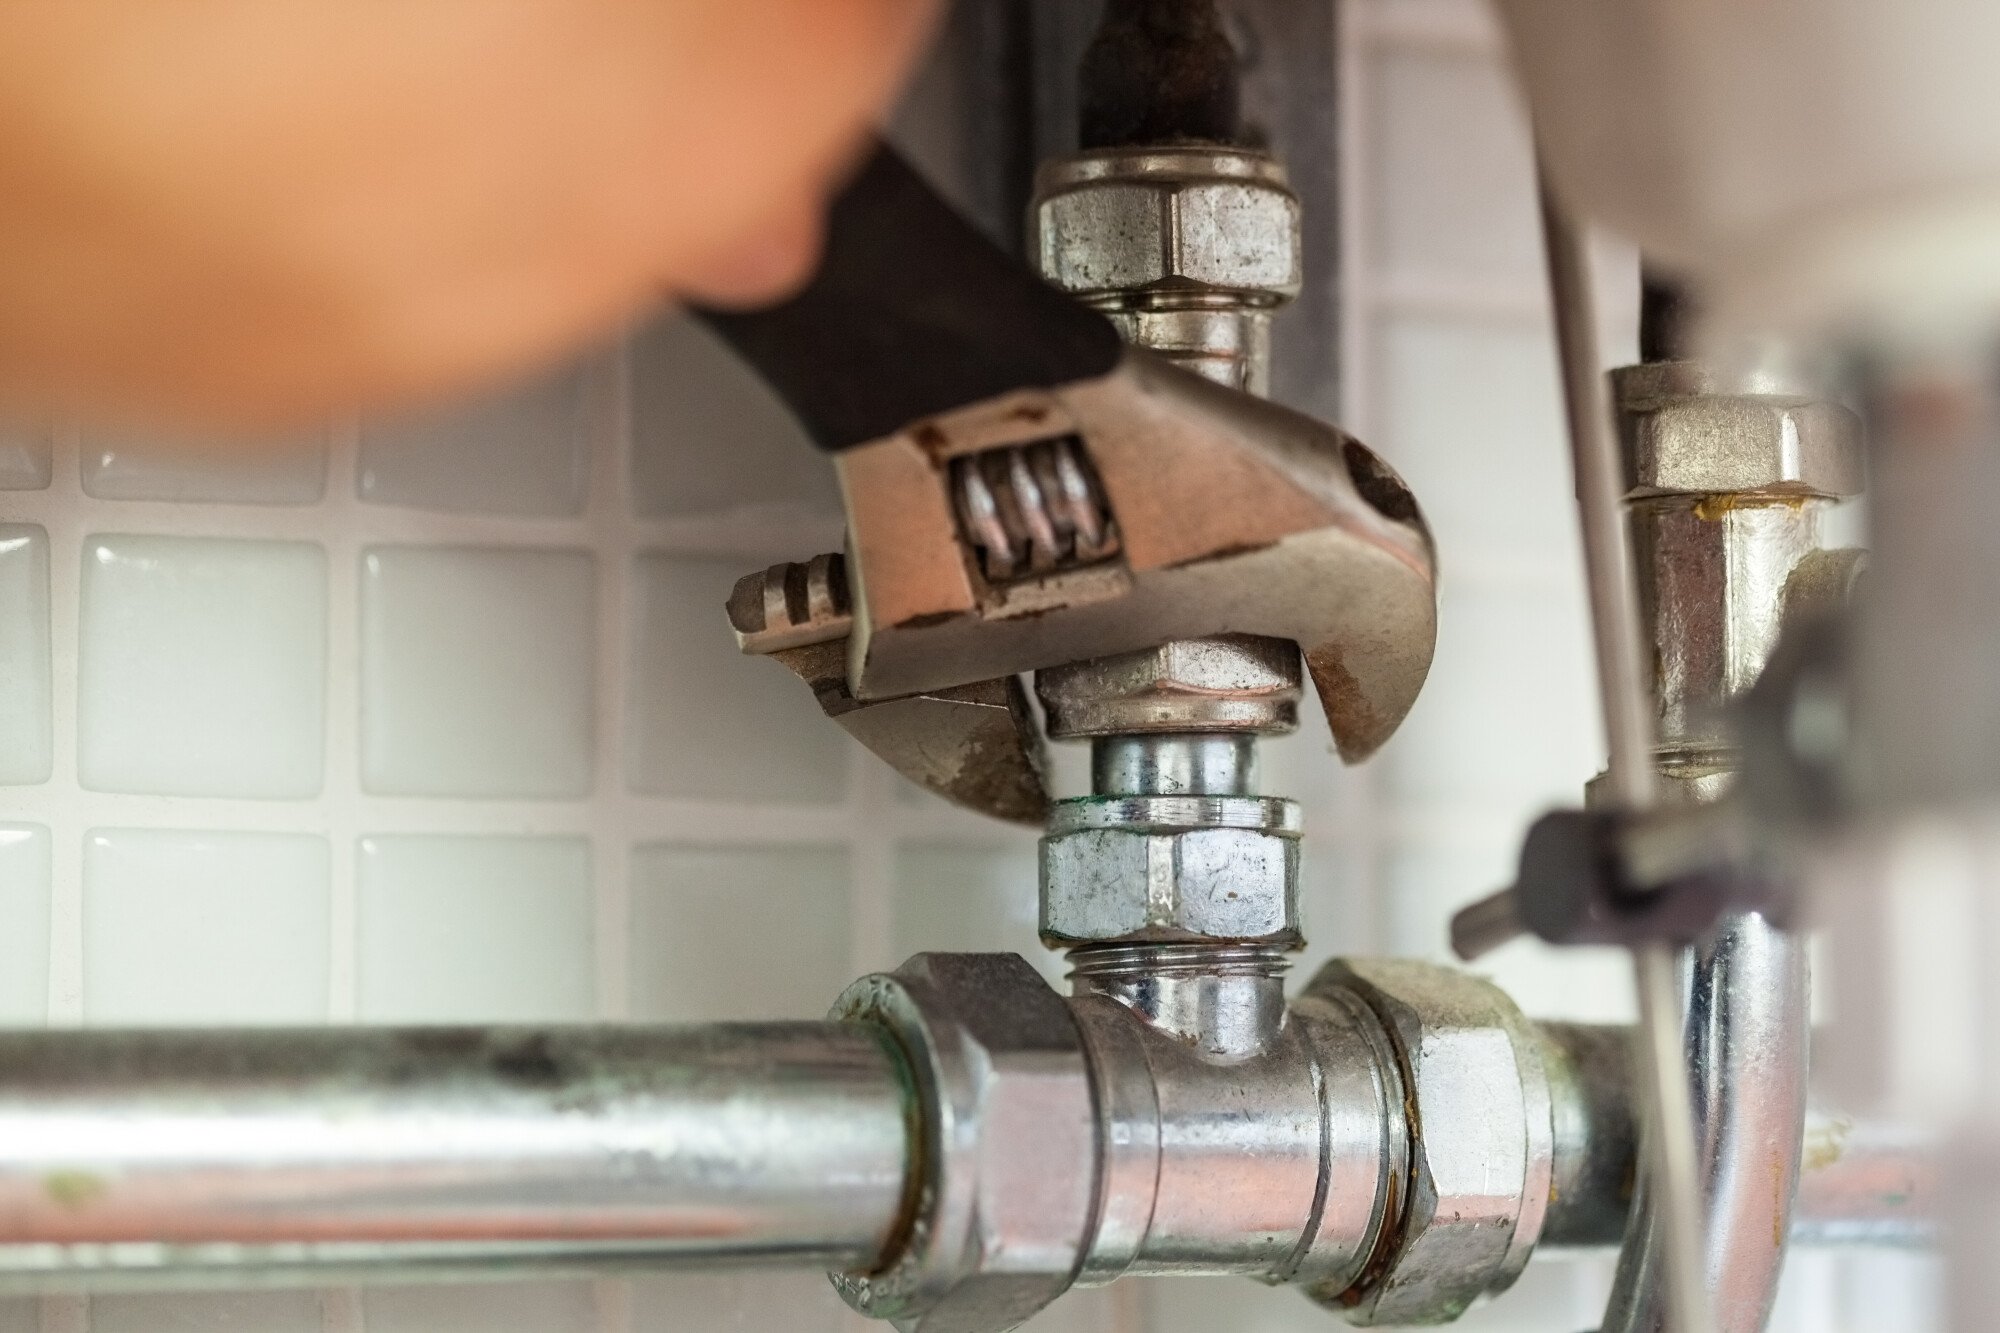 Stop and read this if you live in a house with old plumbing. Learn how to maintain your old plumbing system here correctly.